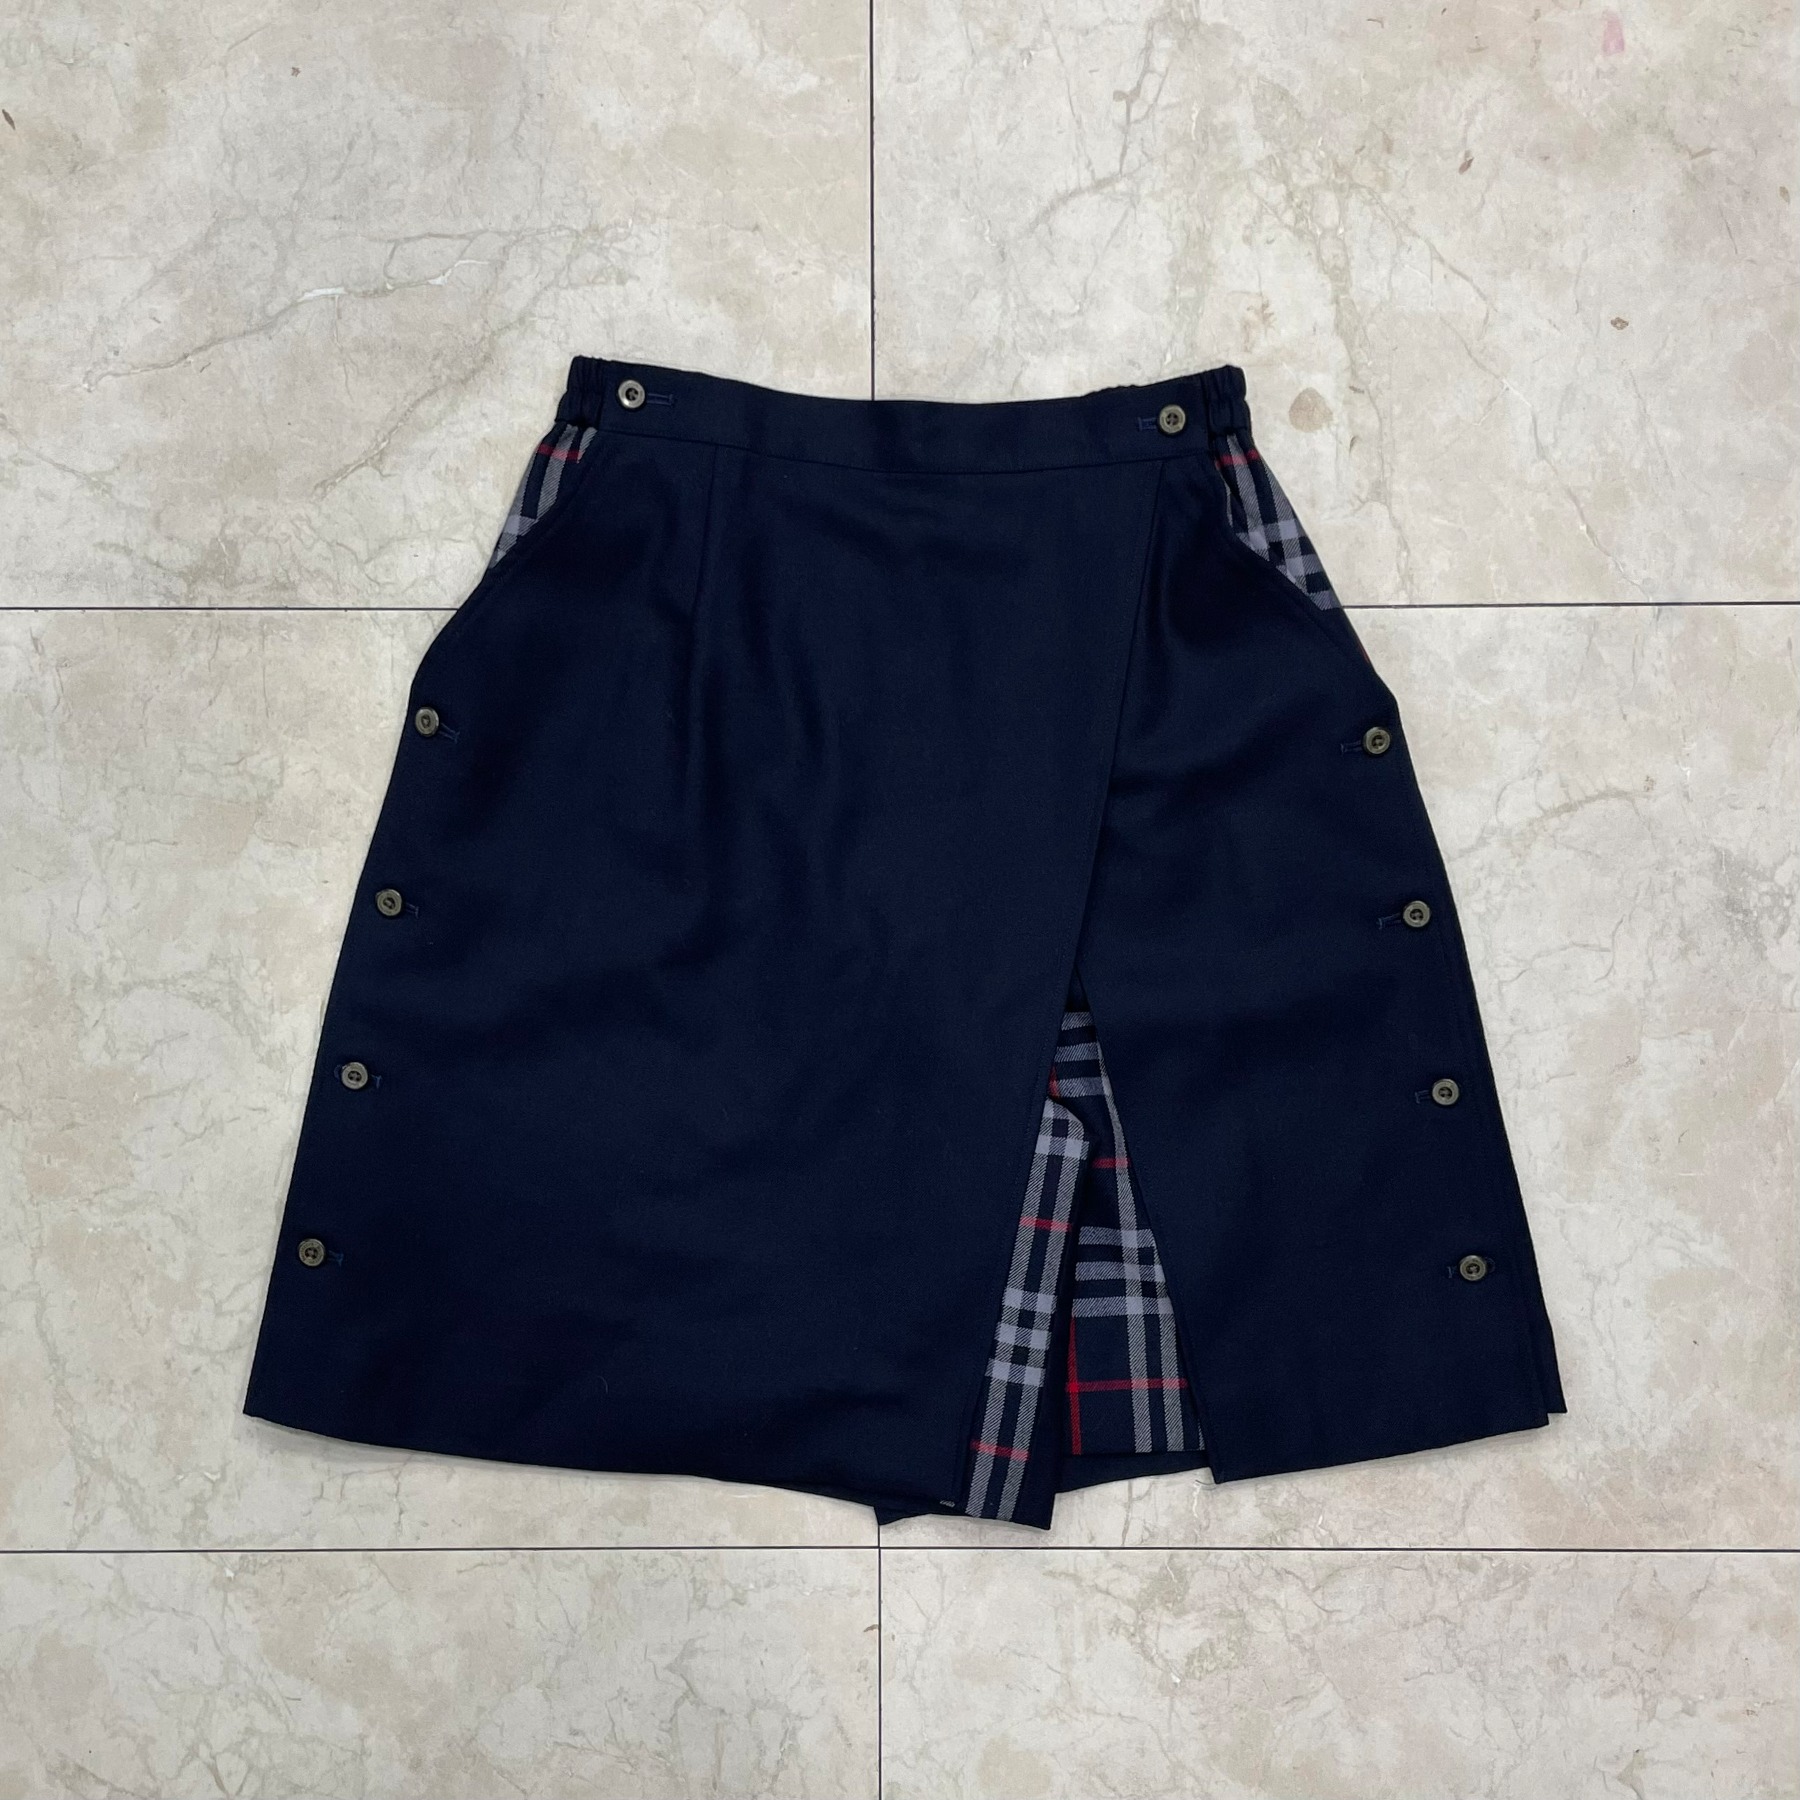 90&#039;s Burberrys Culottes Shorts - 26 to 28inch